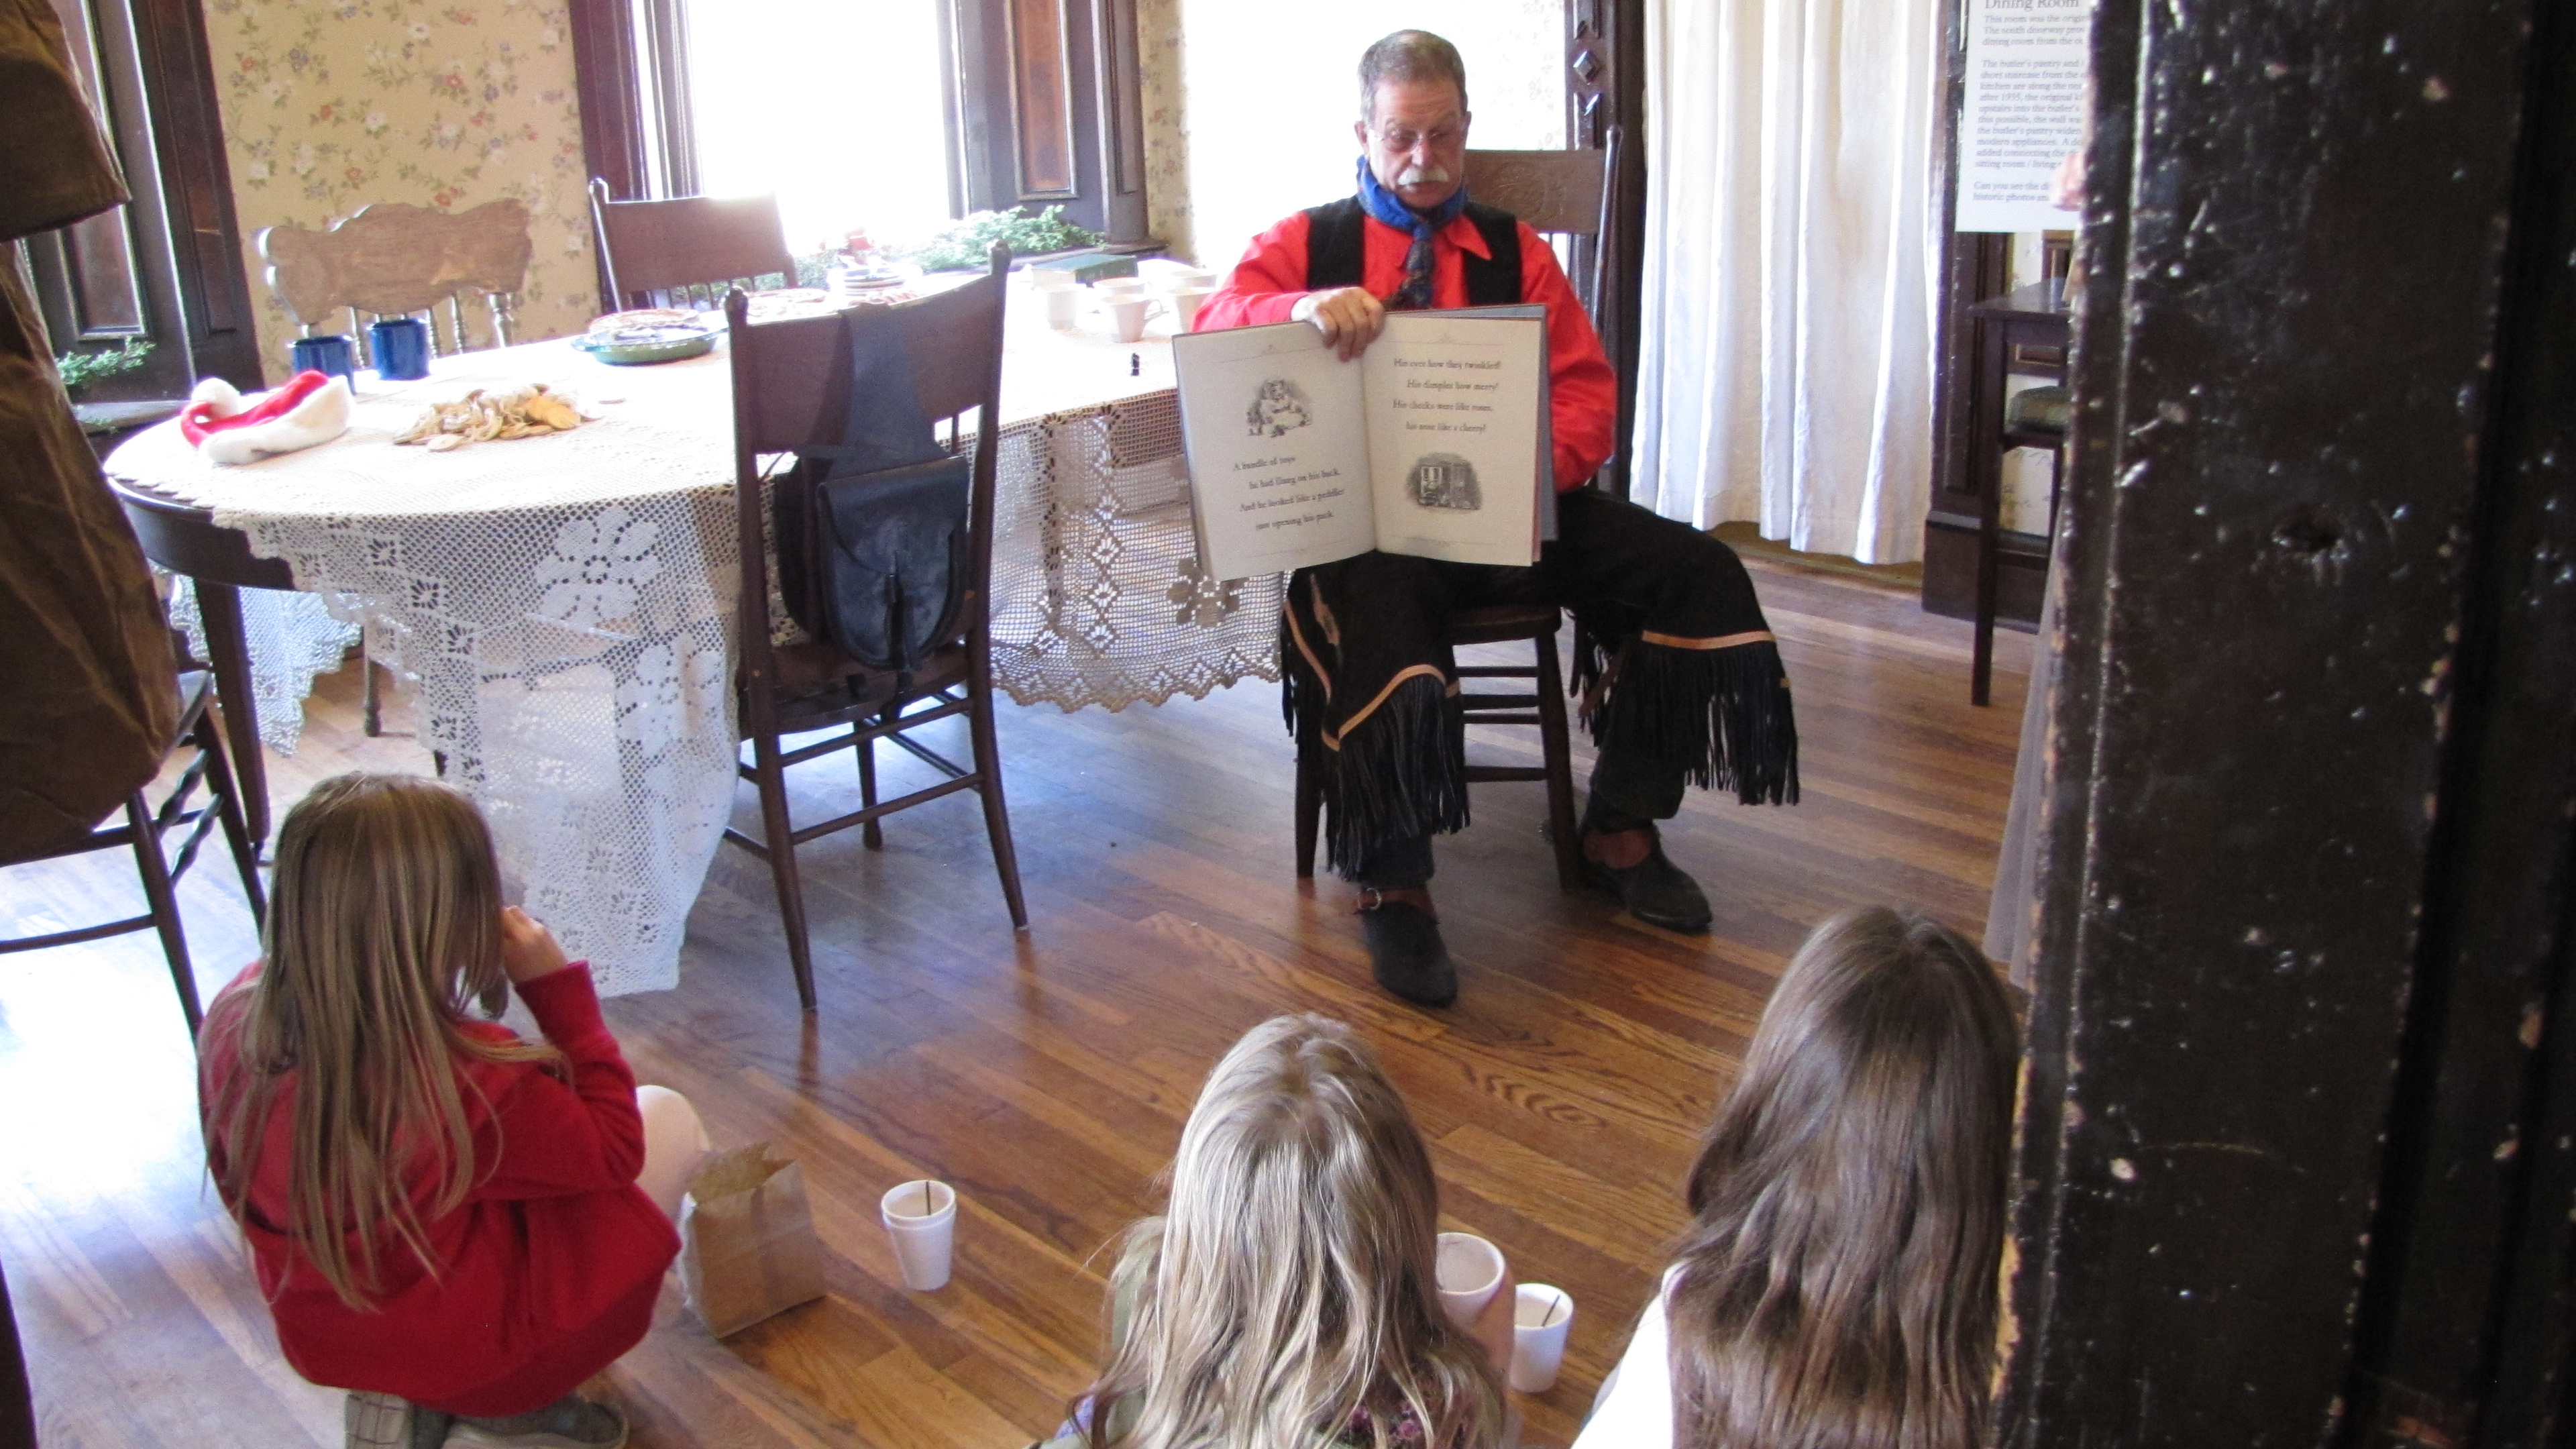 Children being read to by cowboy